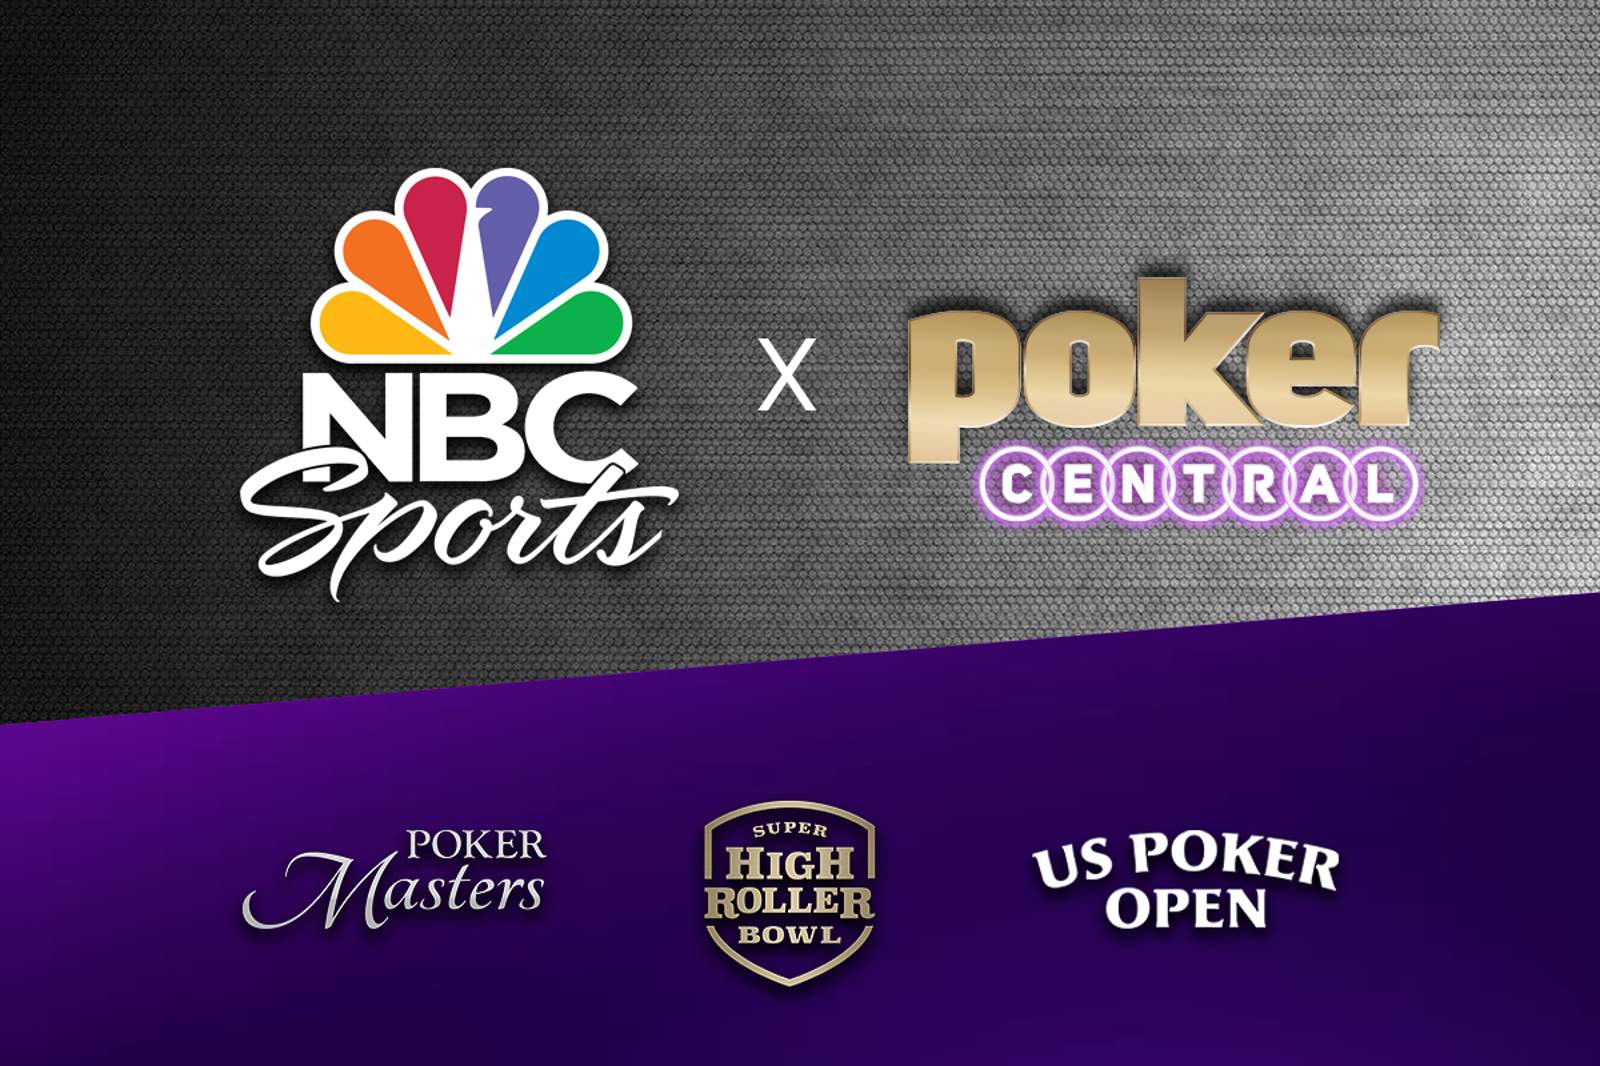 Poker Central and NBC Sports Group Renew Programming and Development Partnership Through 2022